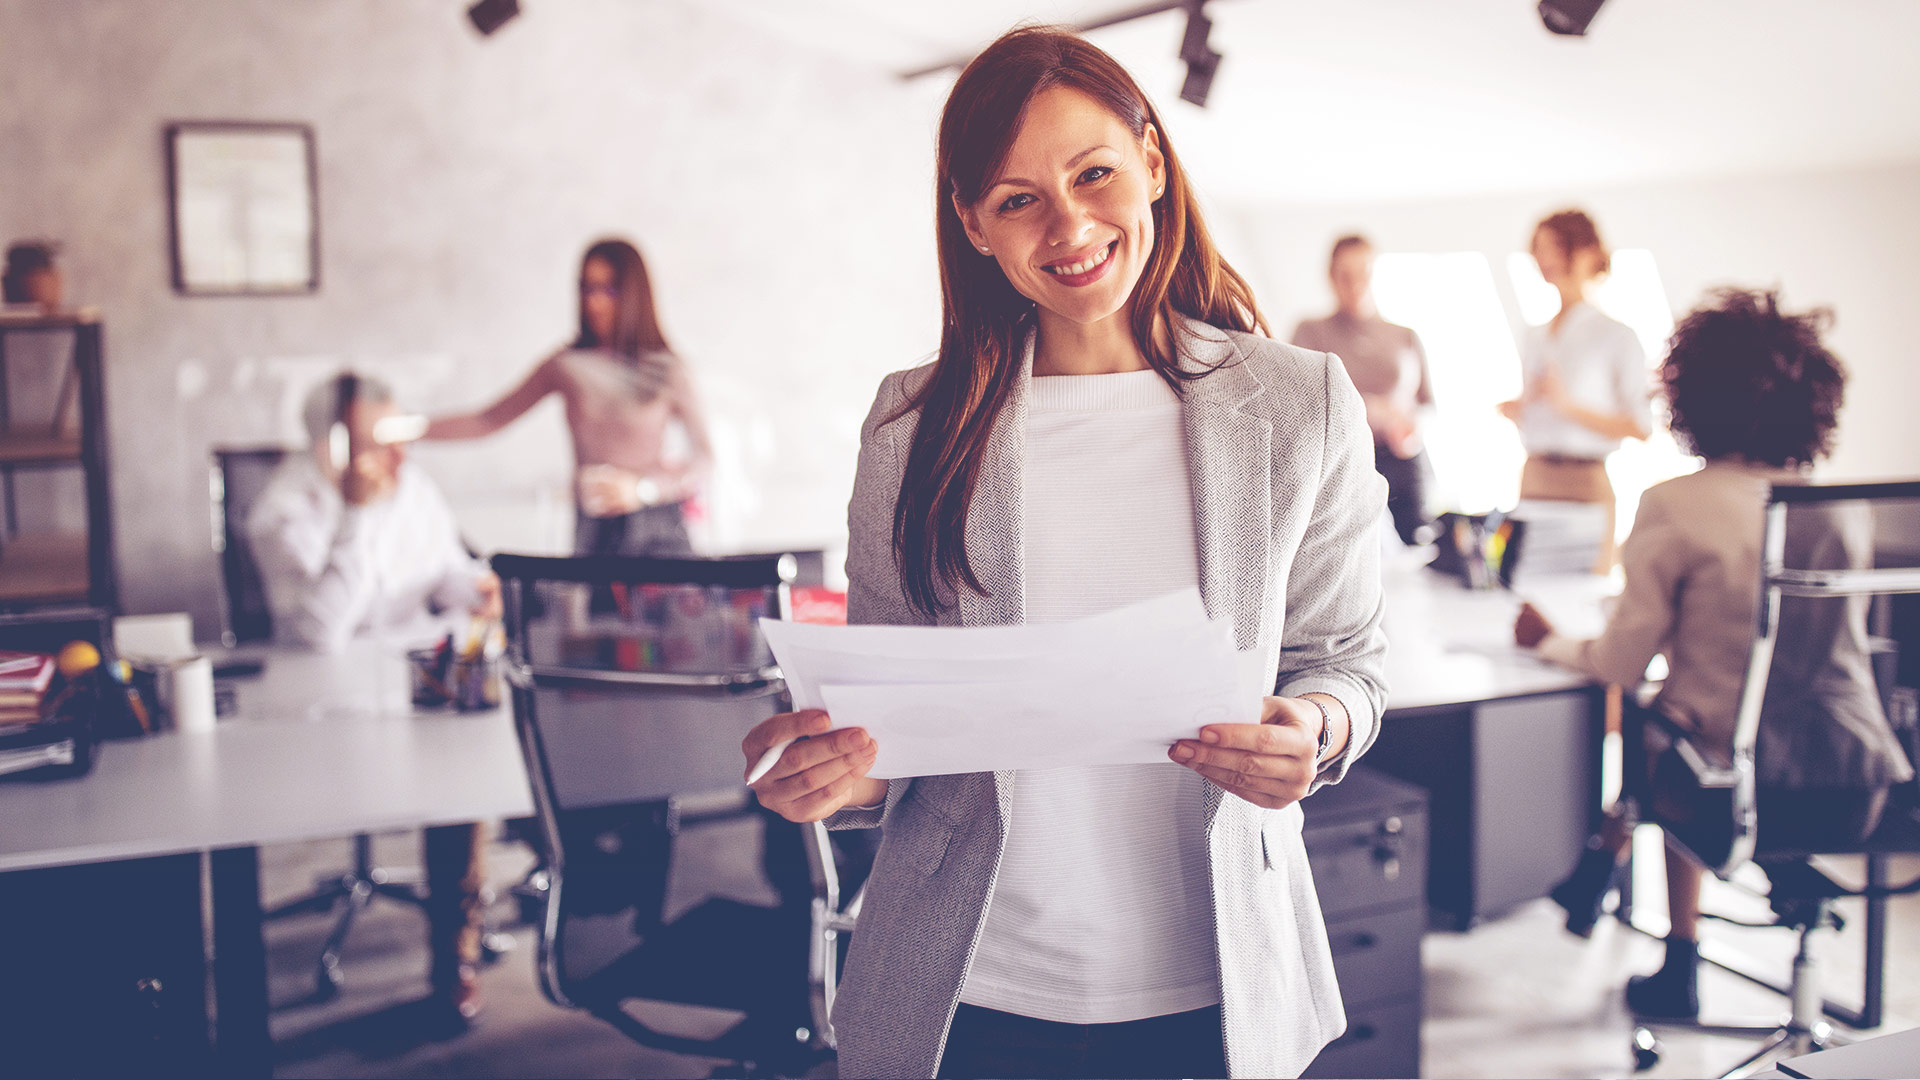 Smiling young professional woman in a conference room holding a pen & papers 